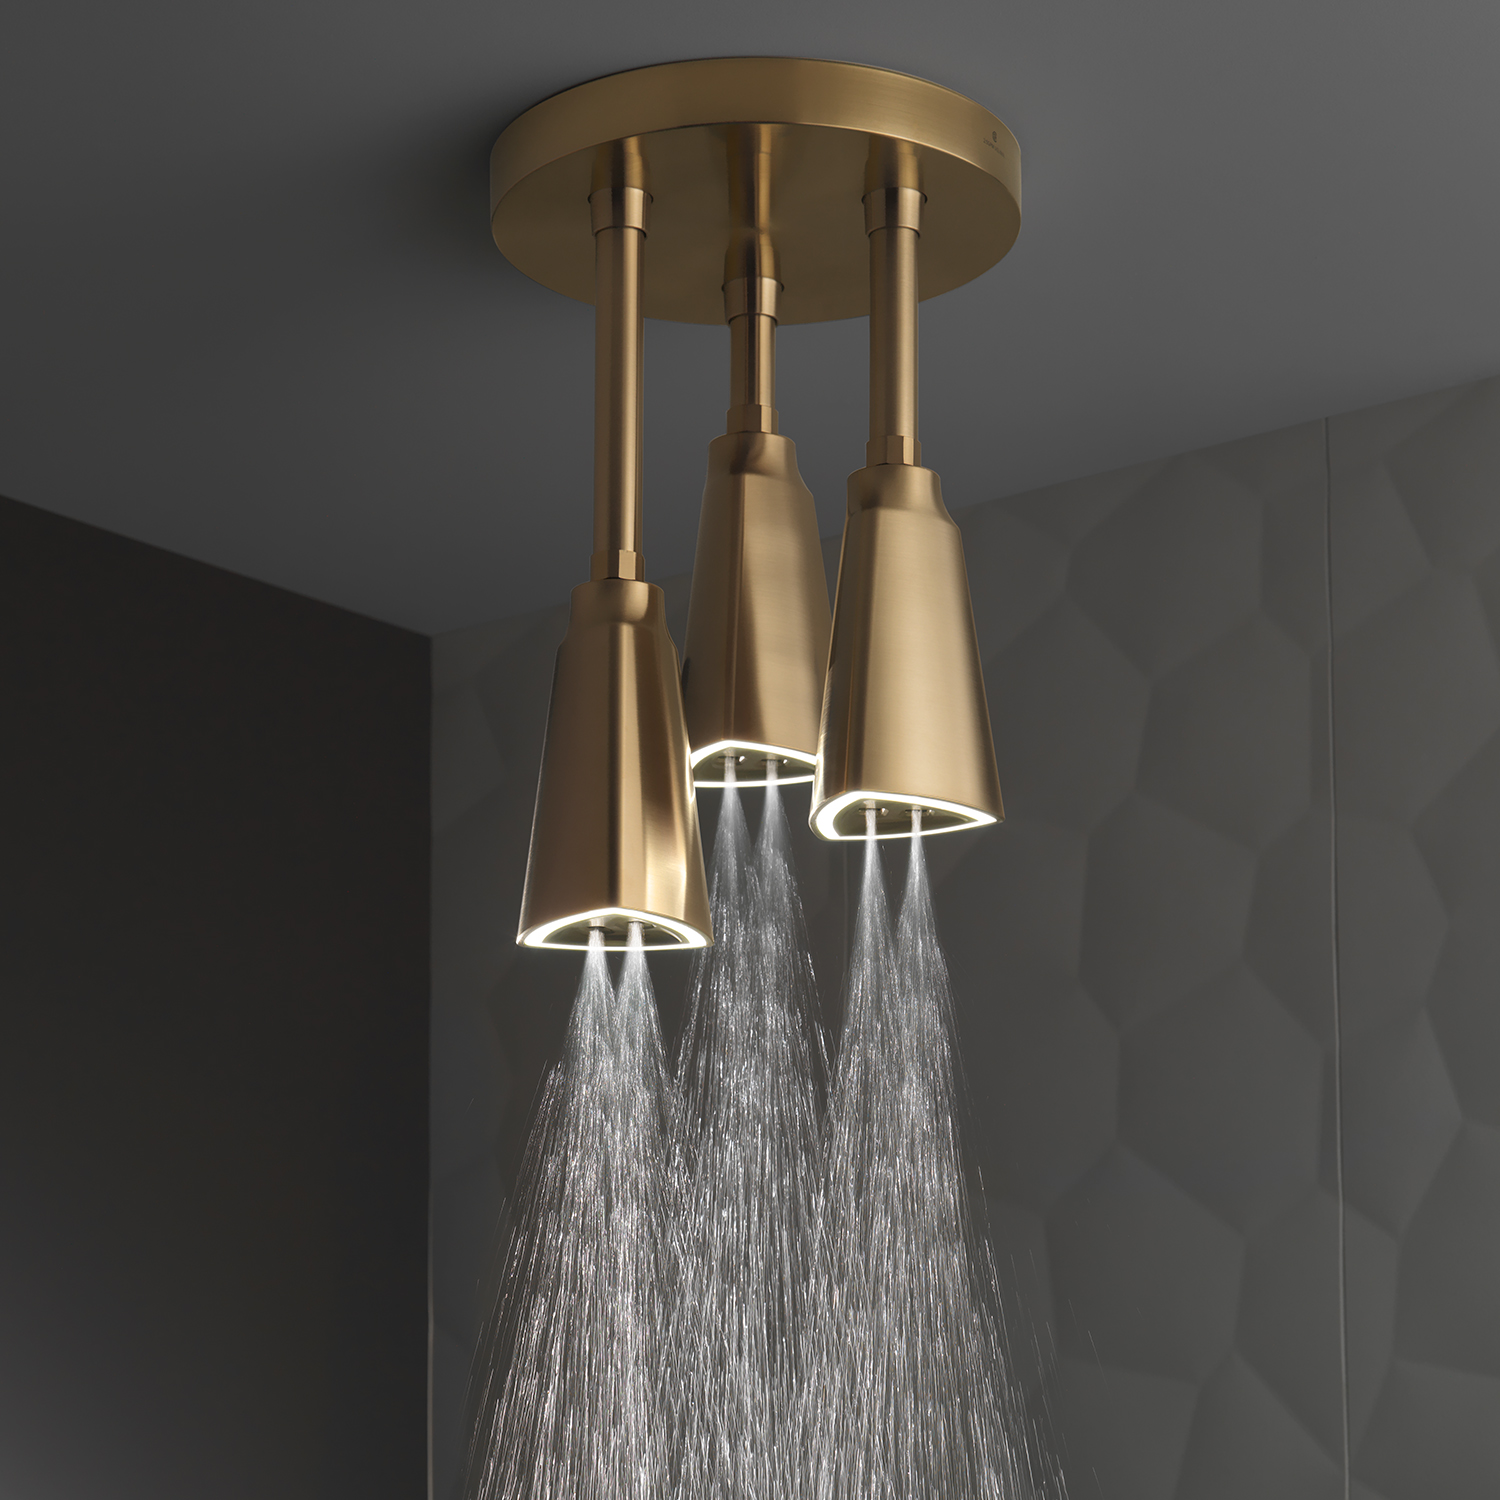 Thoughtfully crafted to create a soothing ambience and radiate upscale appeal, Delta LED Pendant Raincan Shower Heads were inspired by the desire for a more tranquil, spa-like experience in the shower curated for premium bathrooms.